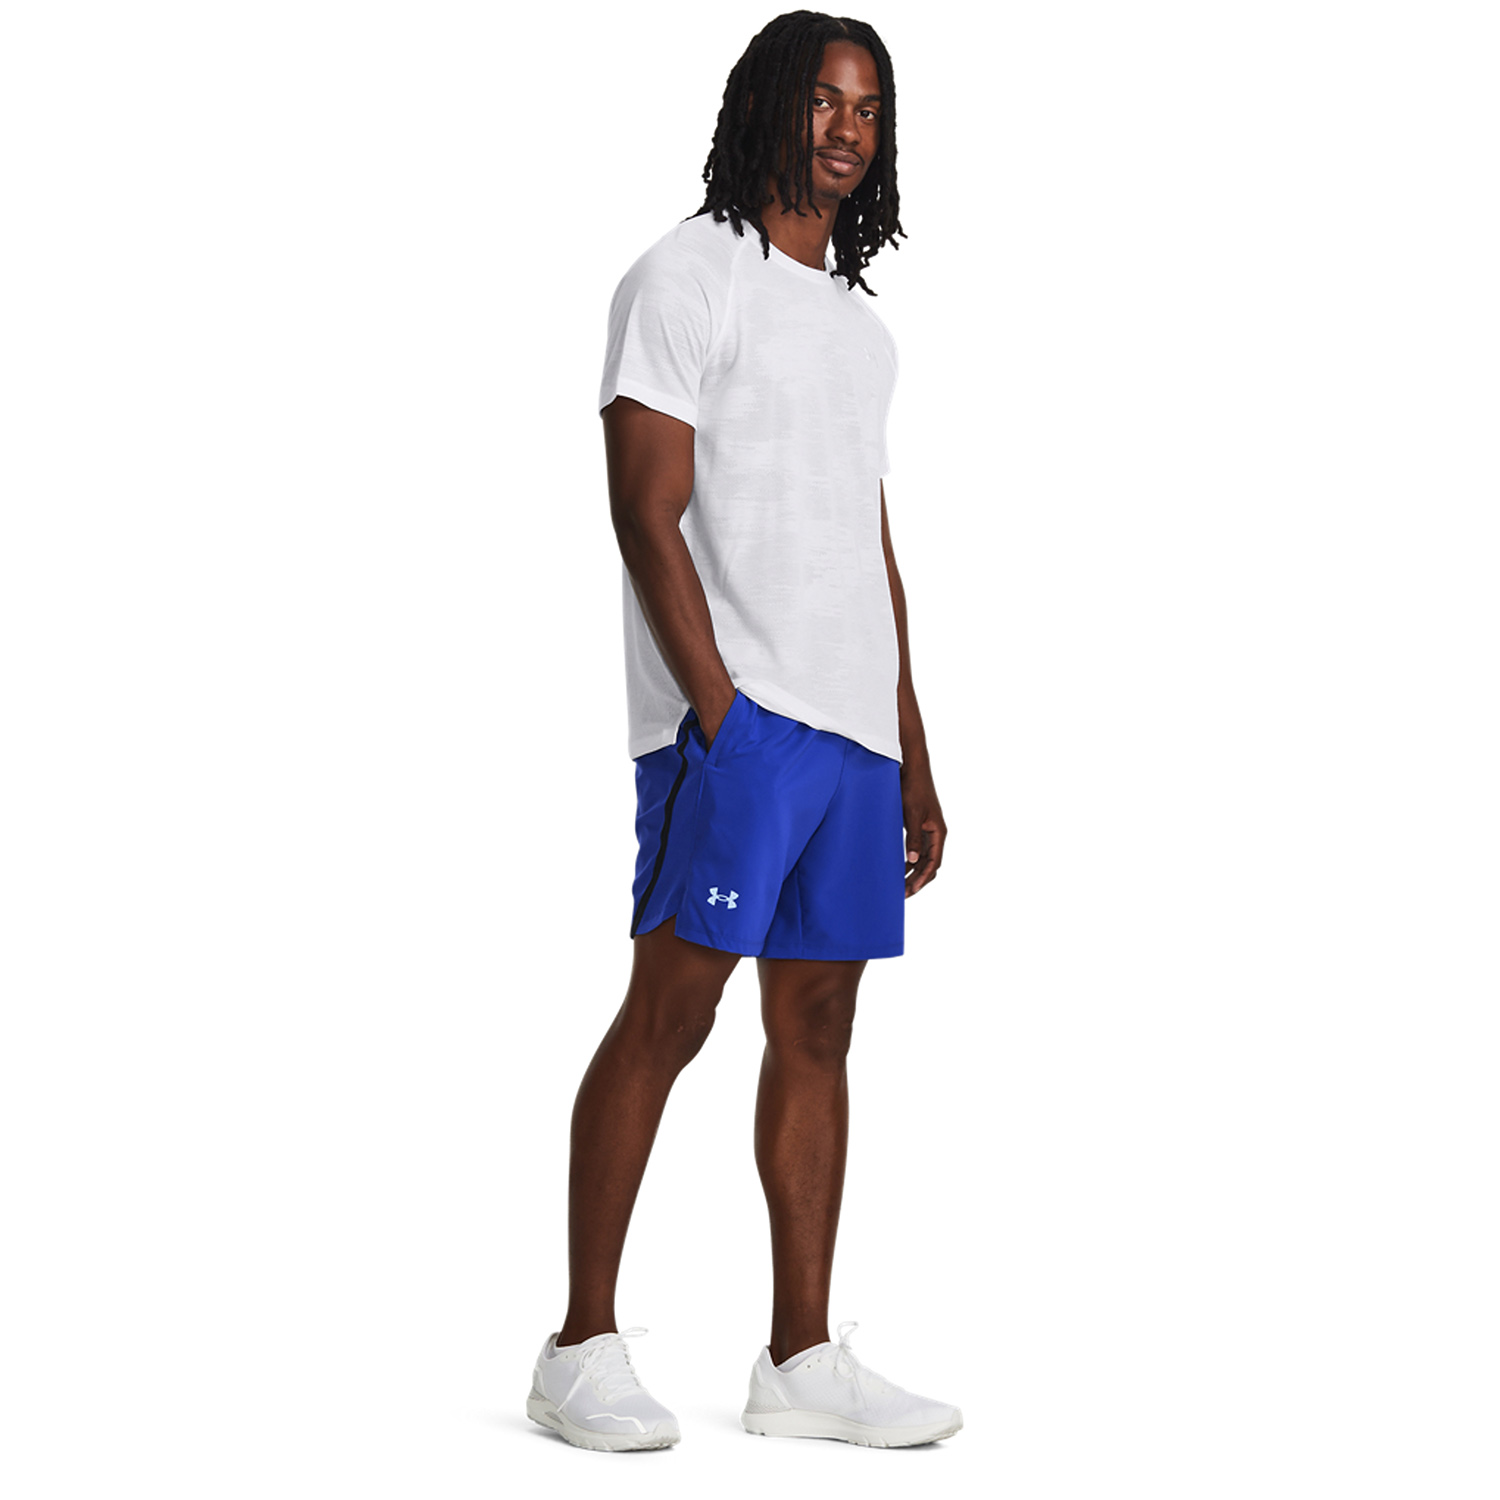 Under Armour Launch 7in Shorts - Team Royal